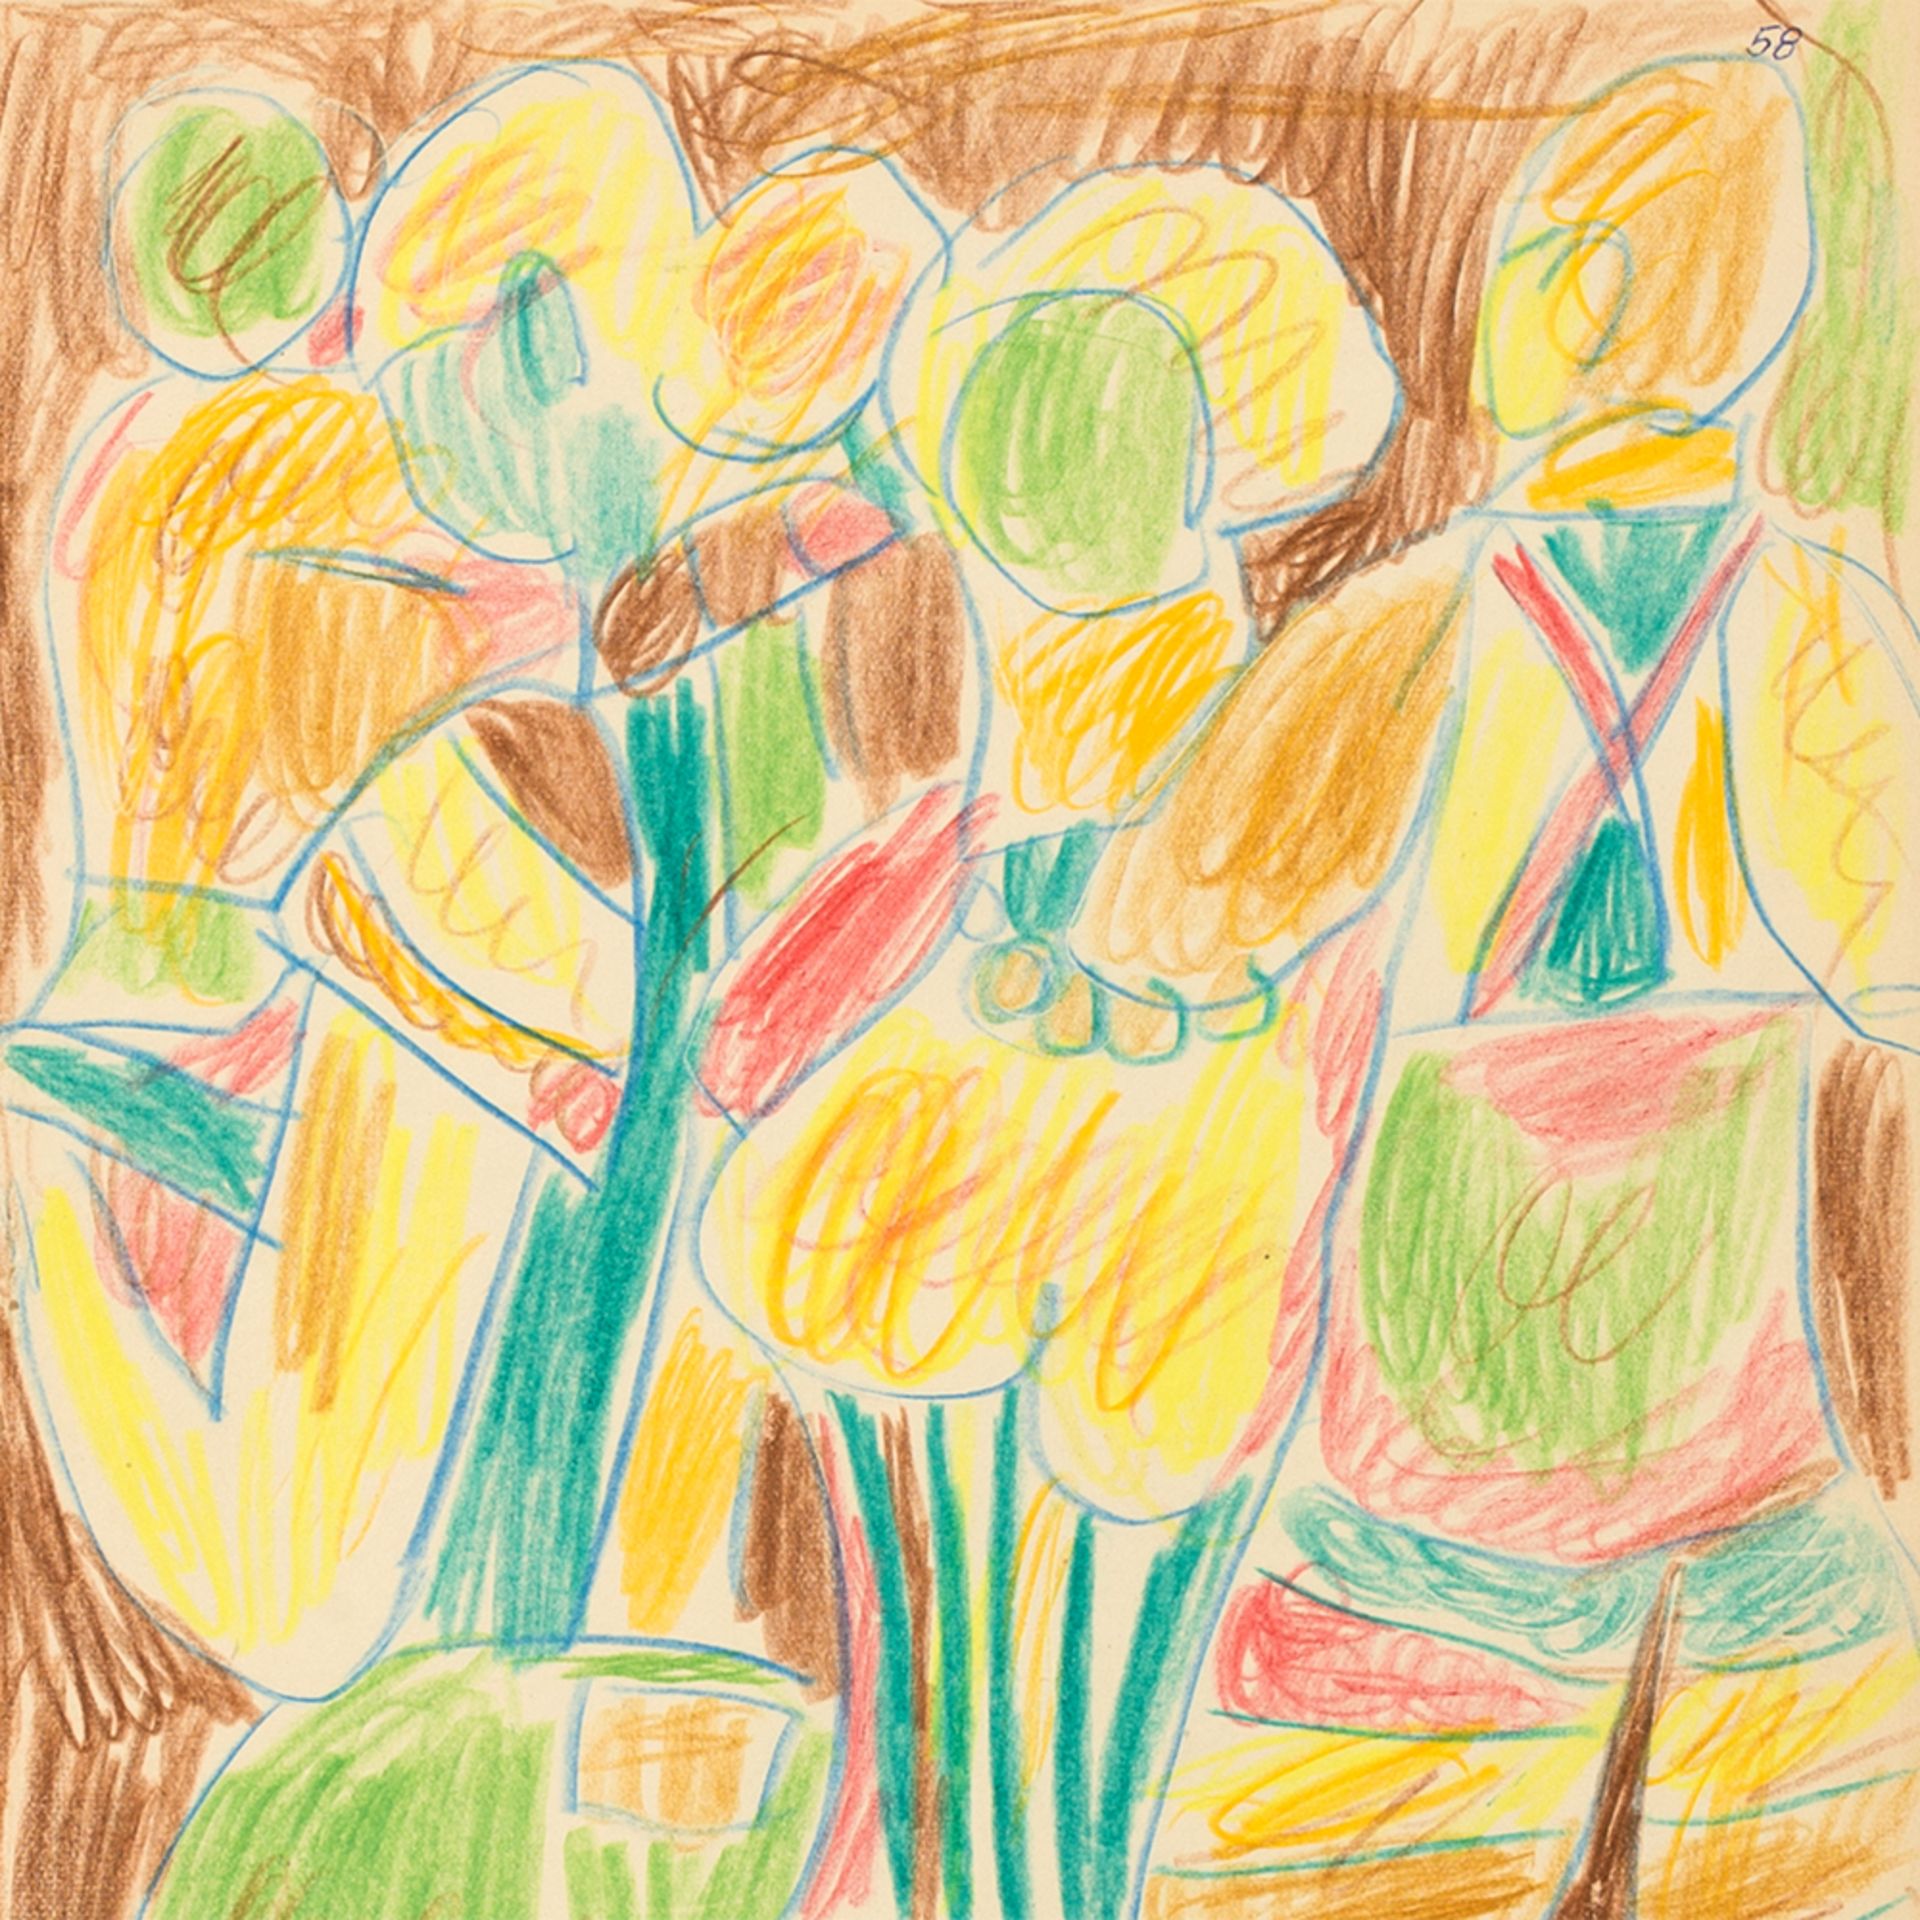 Miklos Németh, Drawing, Colorful Figures, Hungary, 2008 - Image 7 of 7